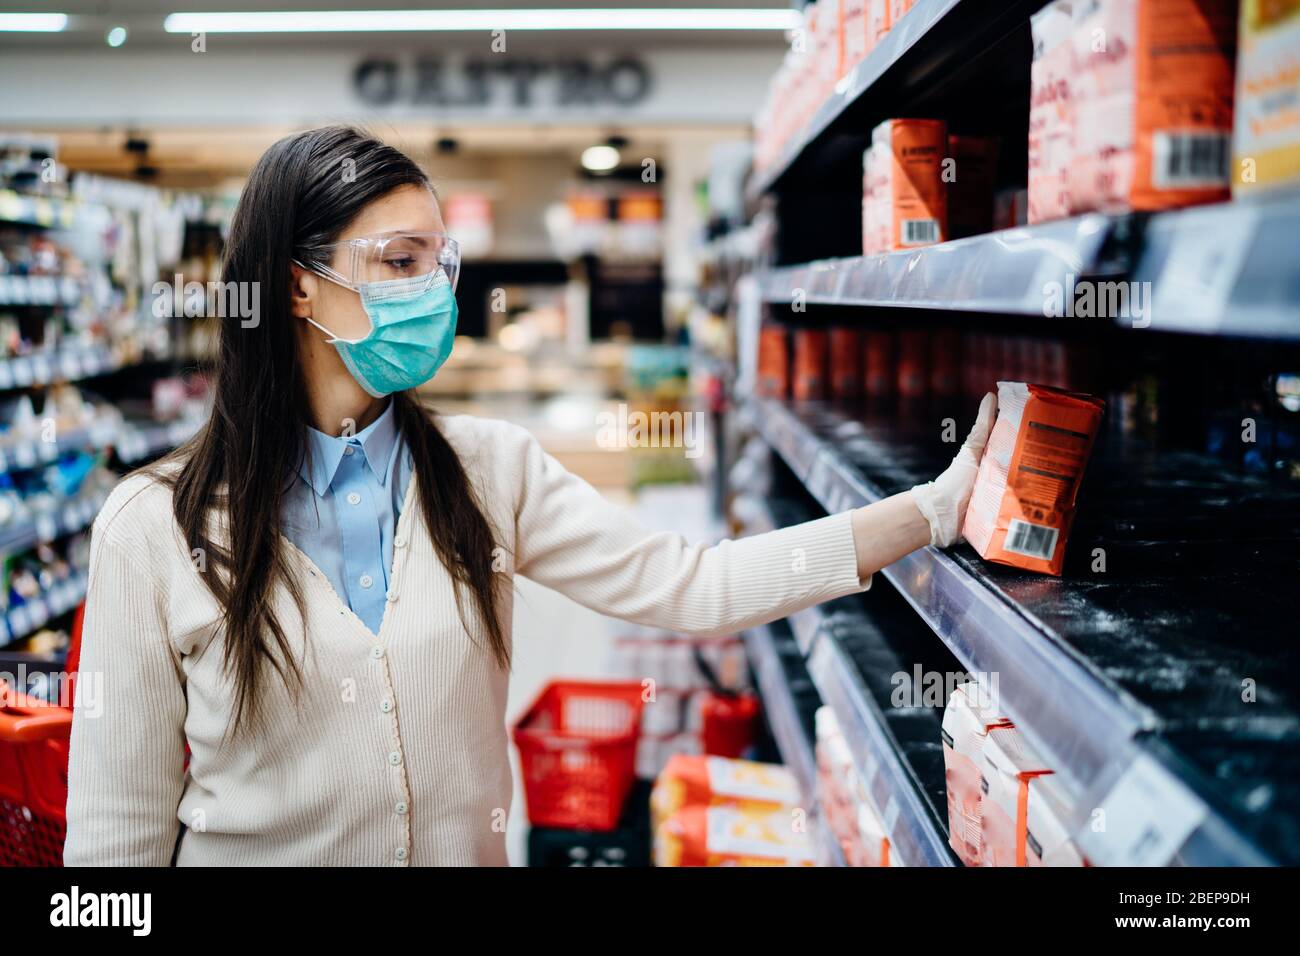 Woman wearing mask buying groceries/supplies in supermarket with sold out products.Food supplies flour shortage.Empty shelves due to novel coronavirus Stock Photo